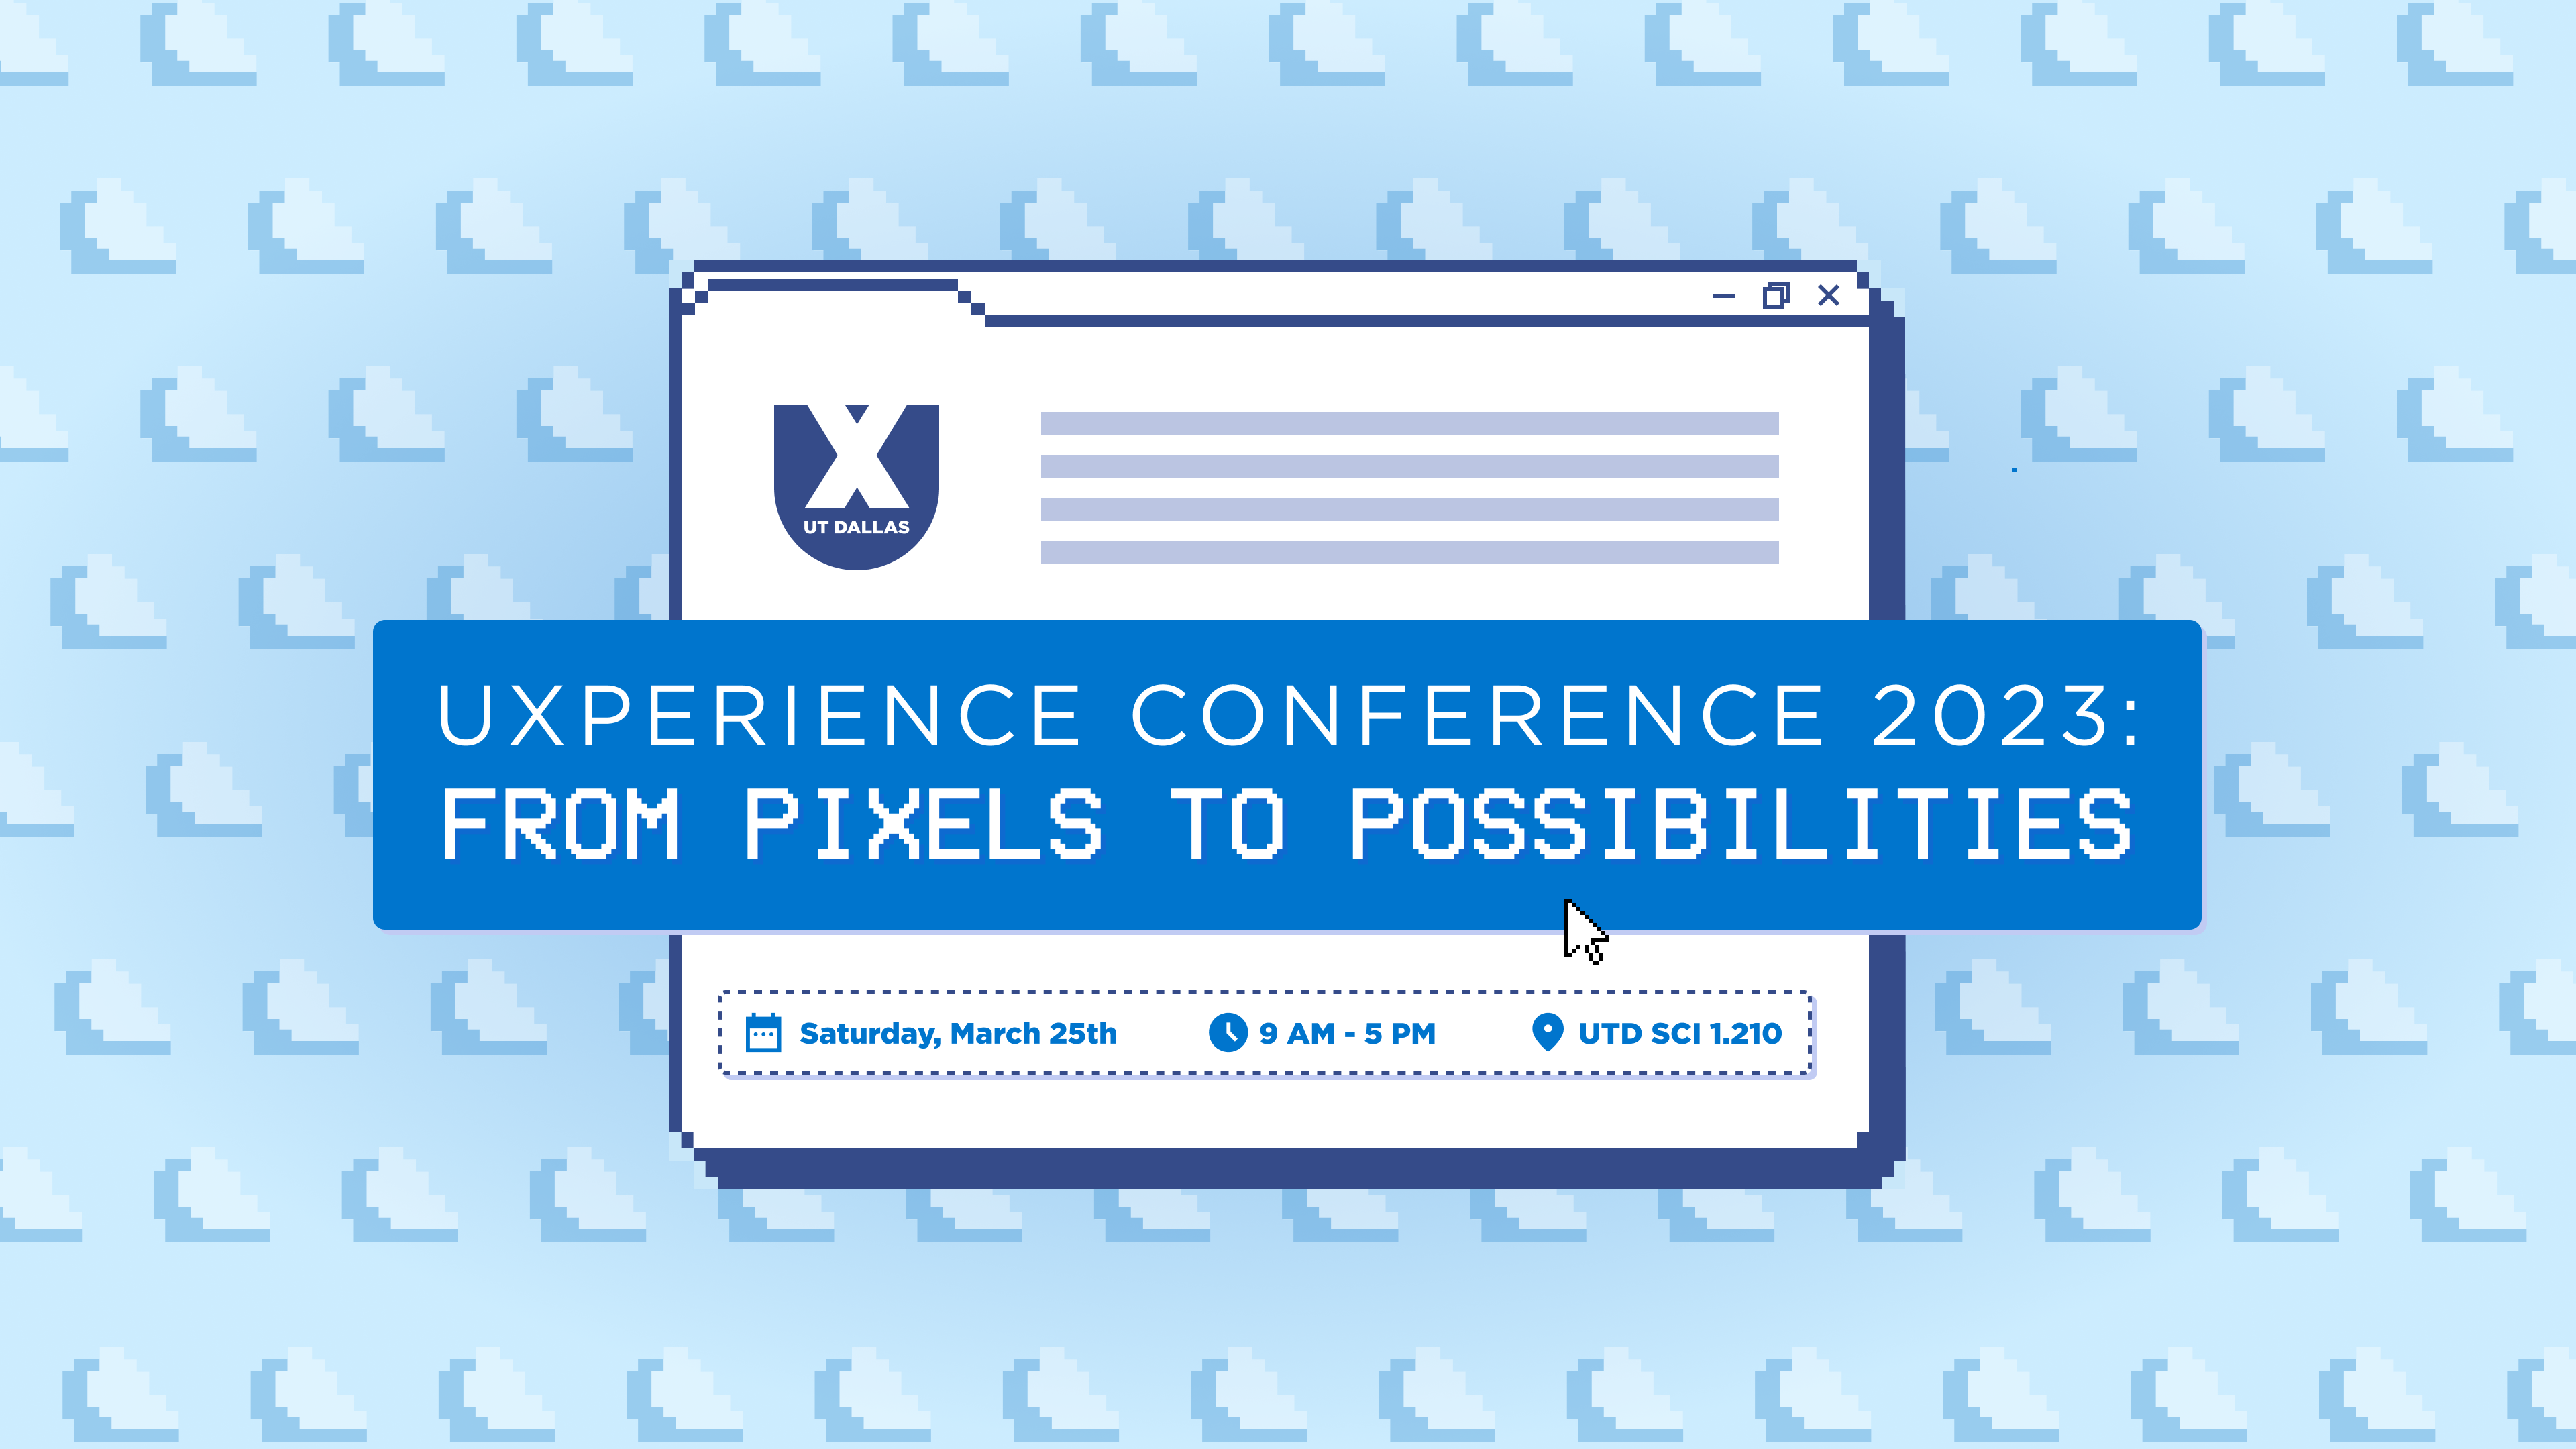 UXPERIENCE CONFERENCE 2023